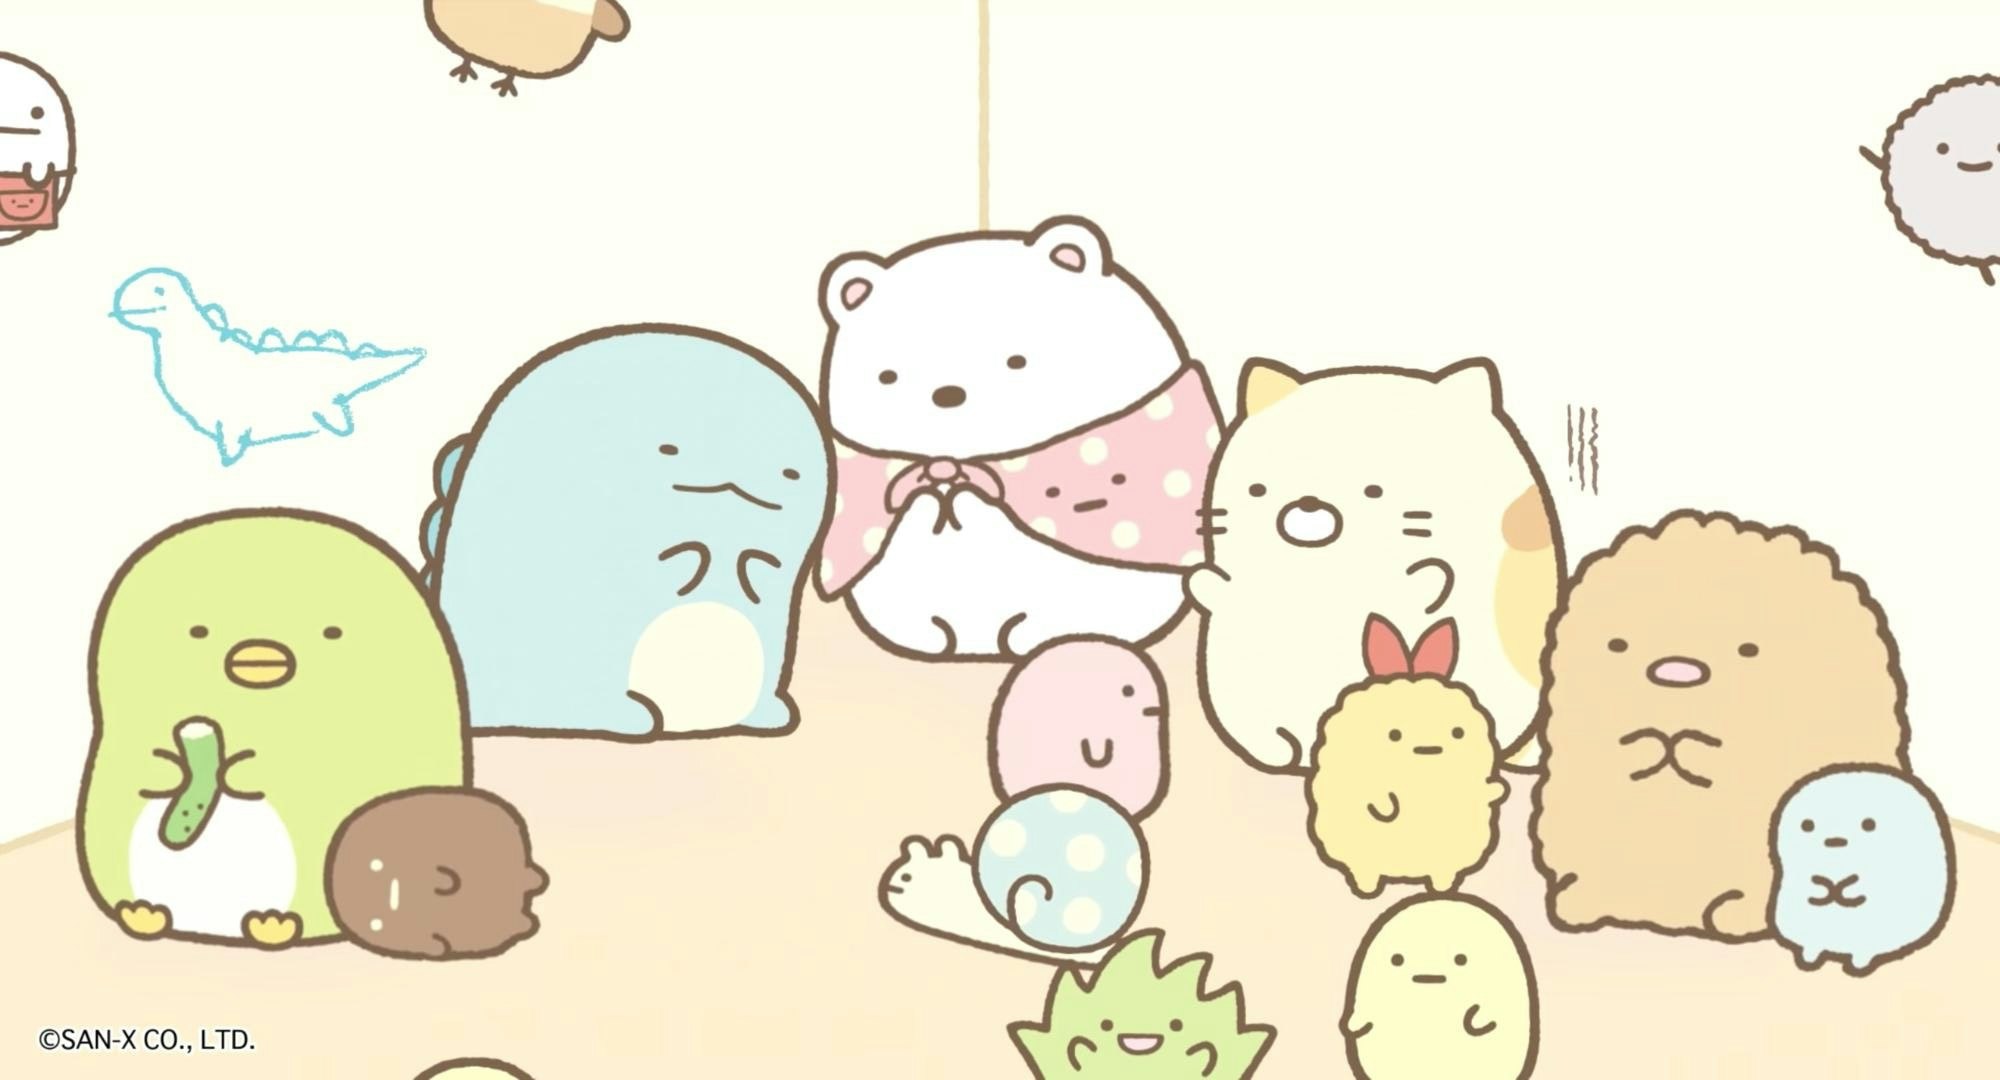 Sumikko Gurashi - The Cute but Negative Characters Loved by Kids ...